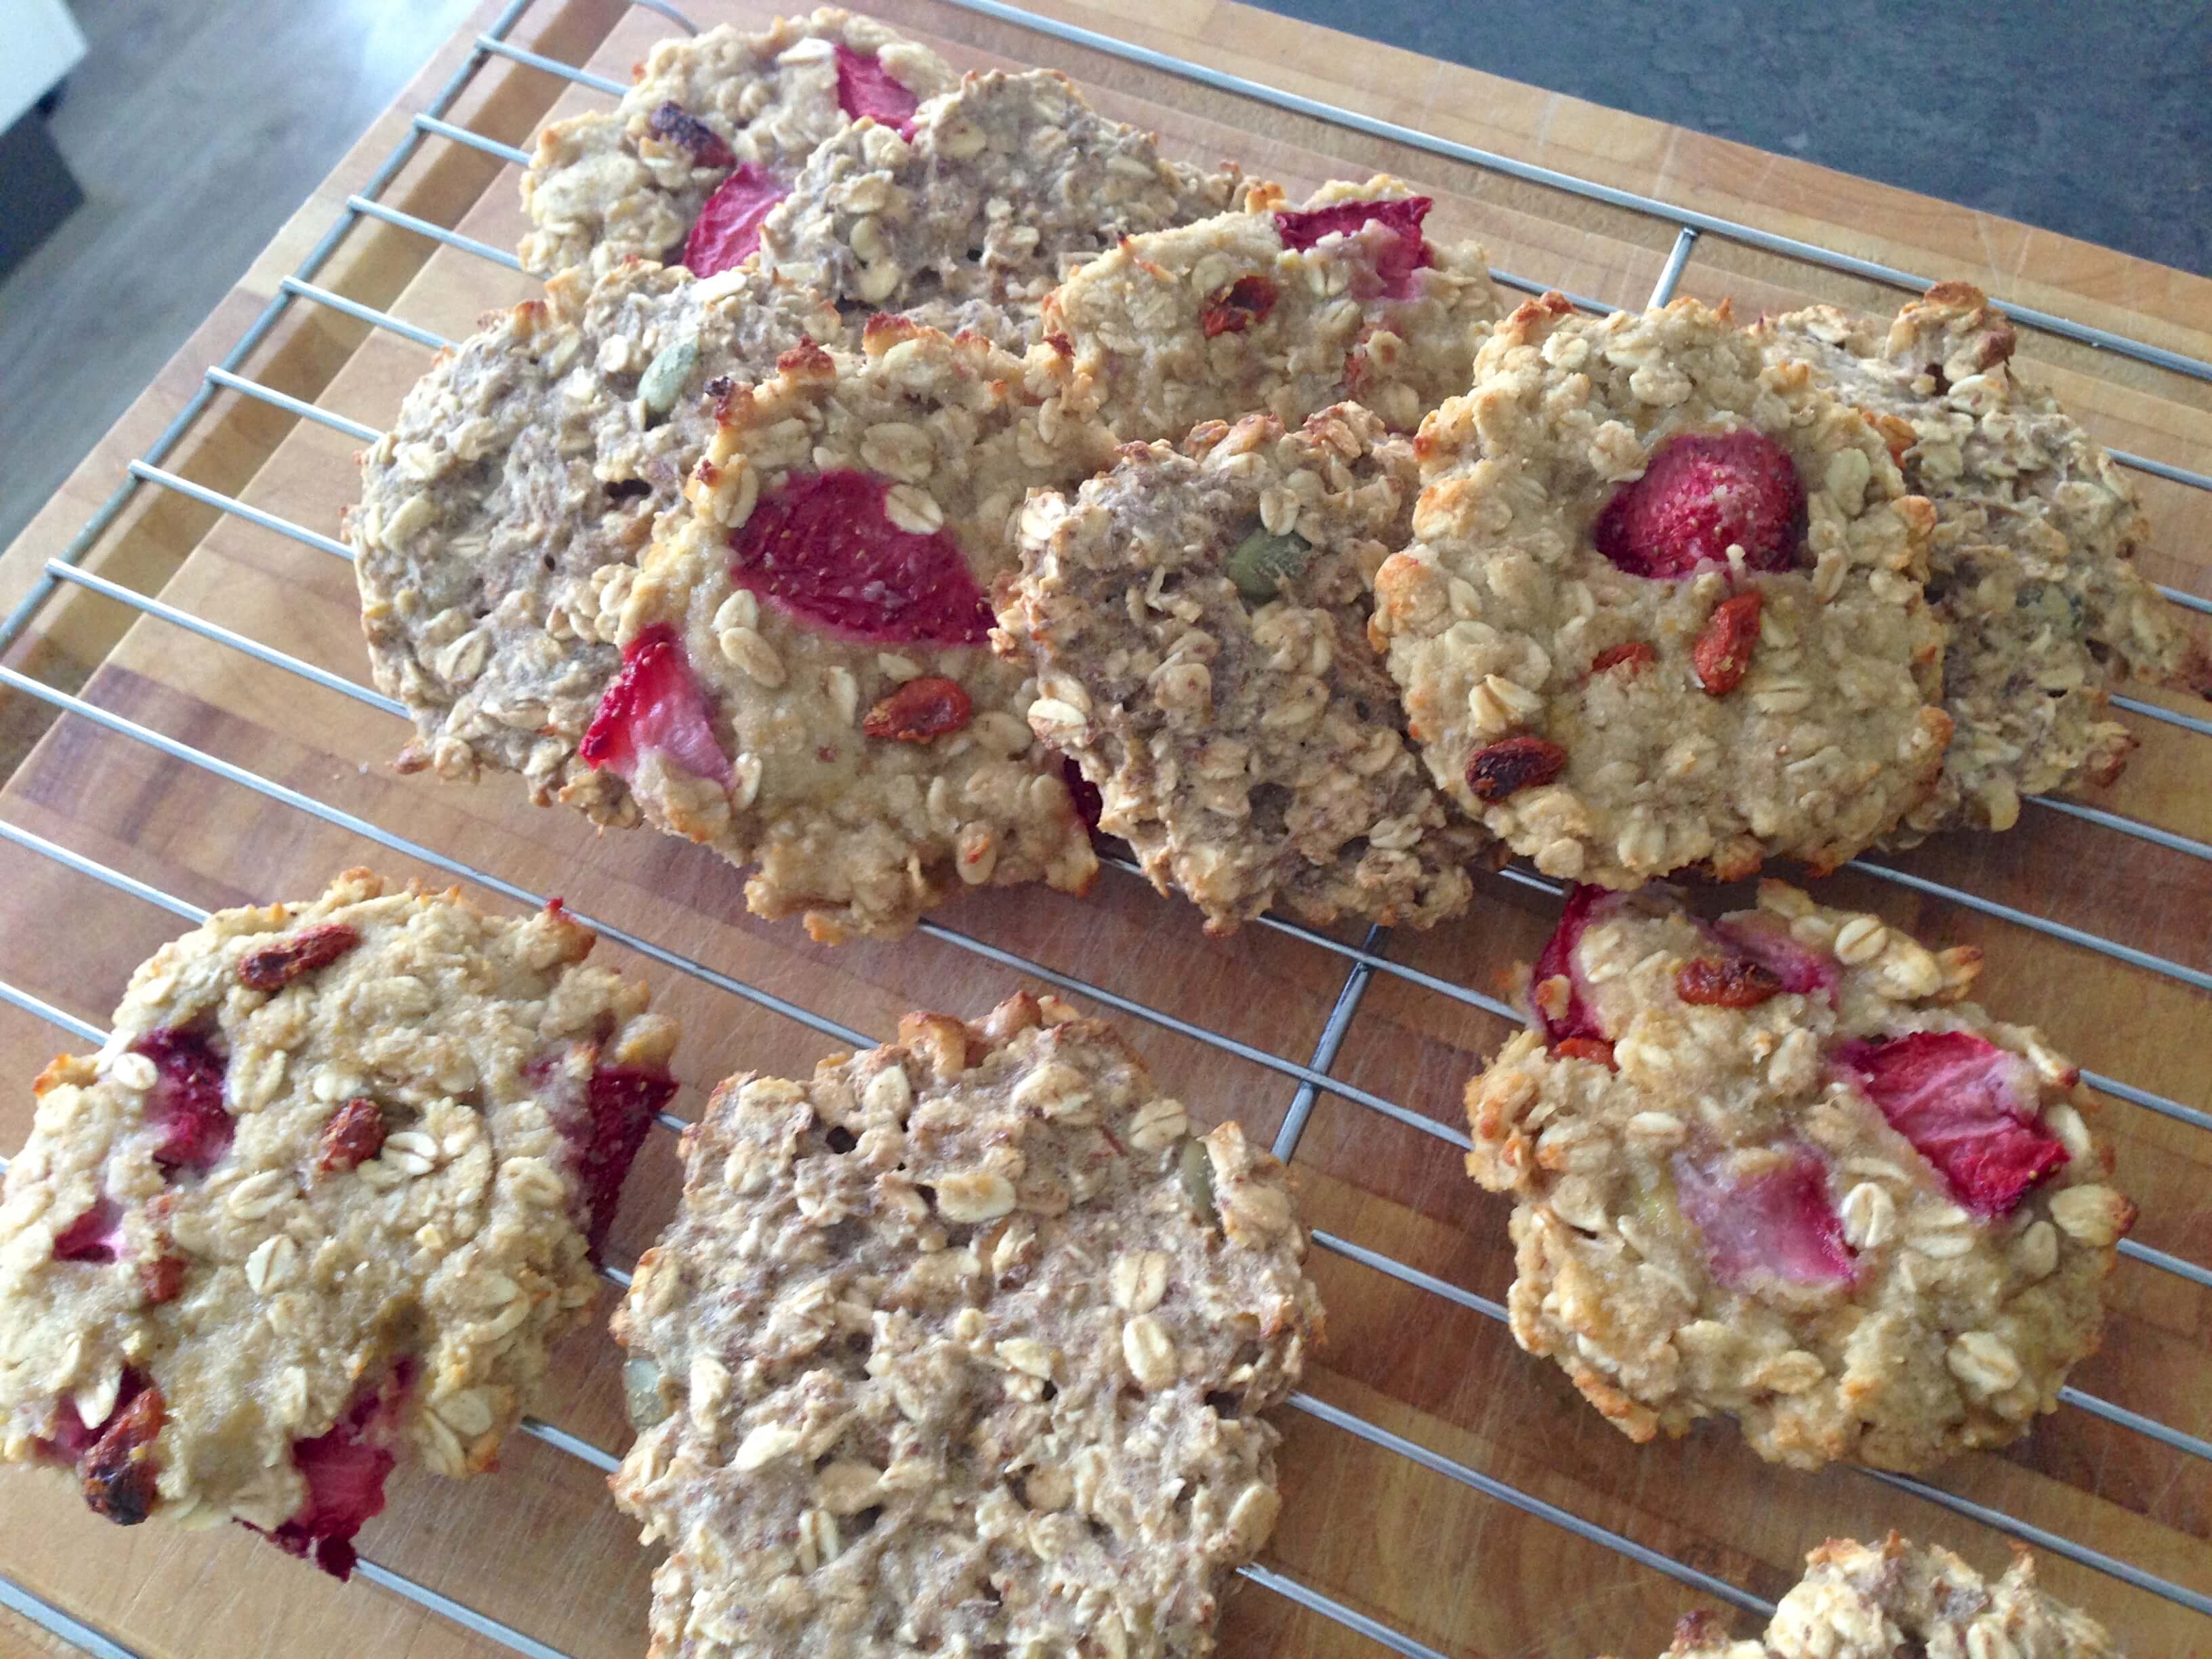 Oat cookies with strawberries and seeds on a cooling rack